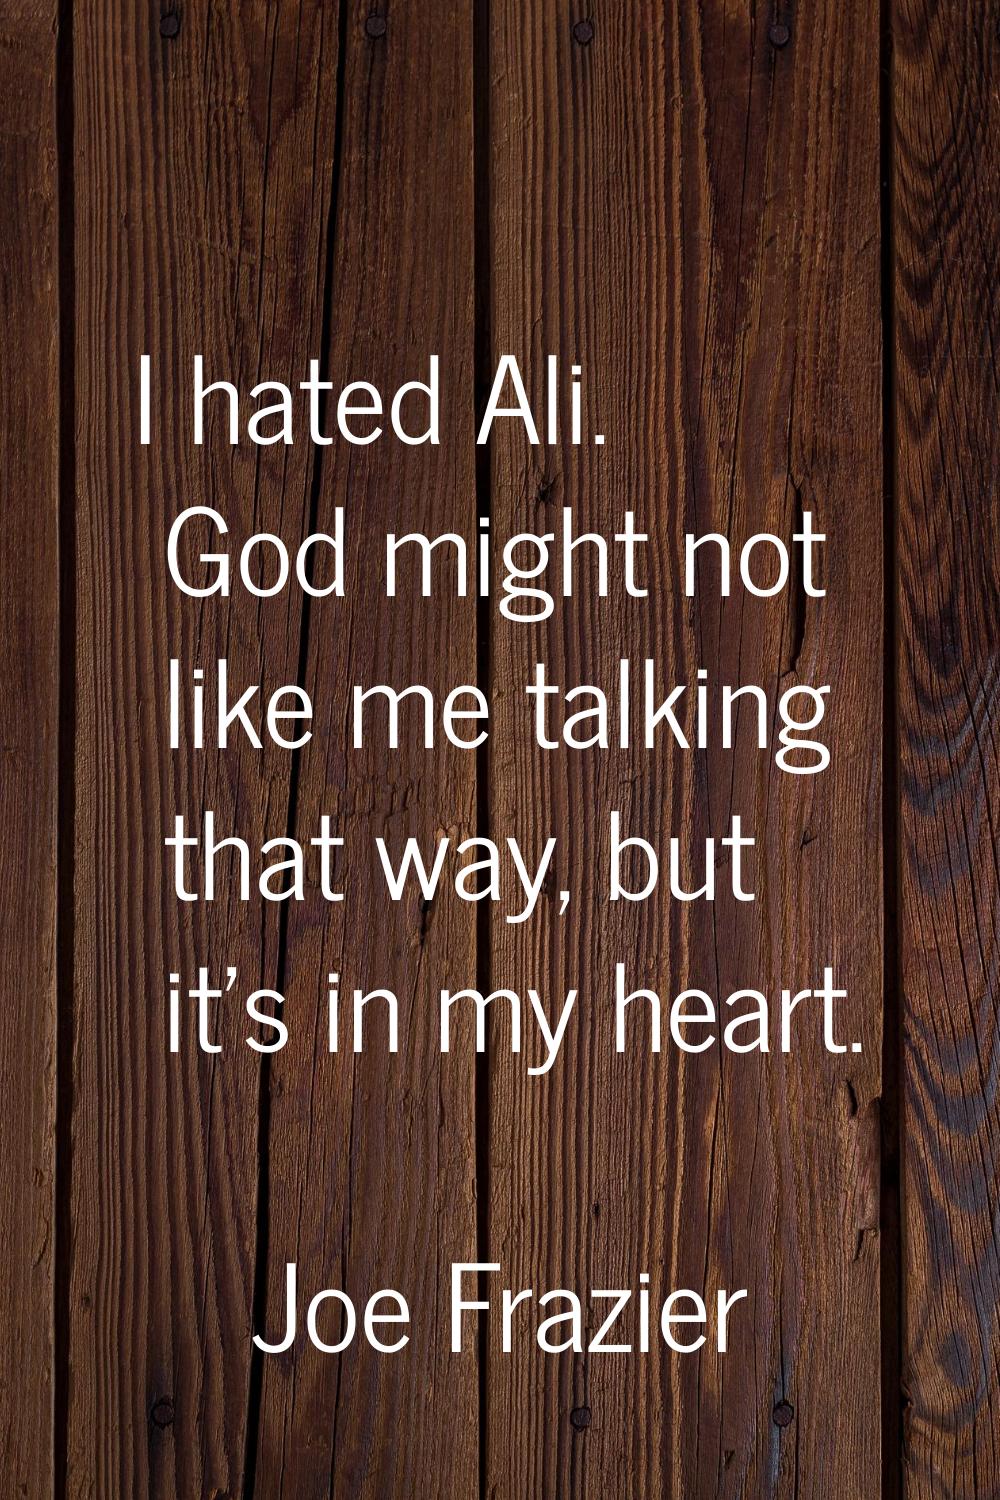 I hated Ali. God might not like me talking that way, but it's in my heart.